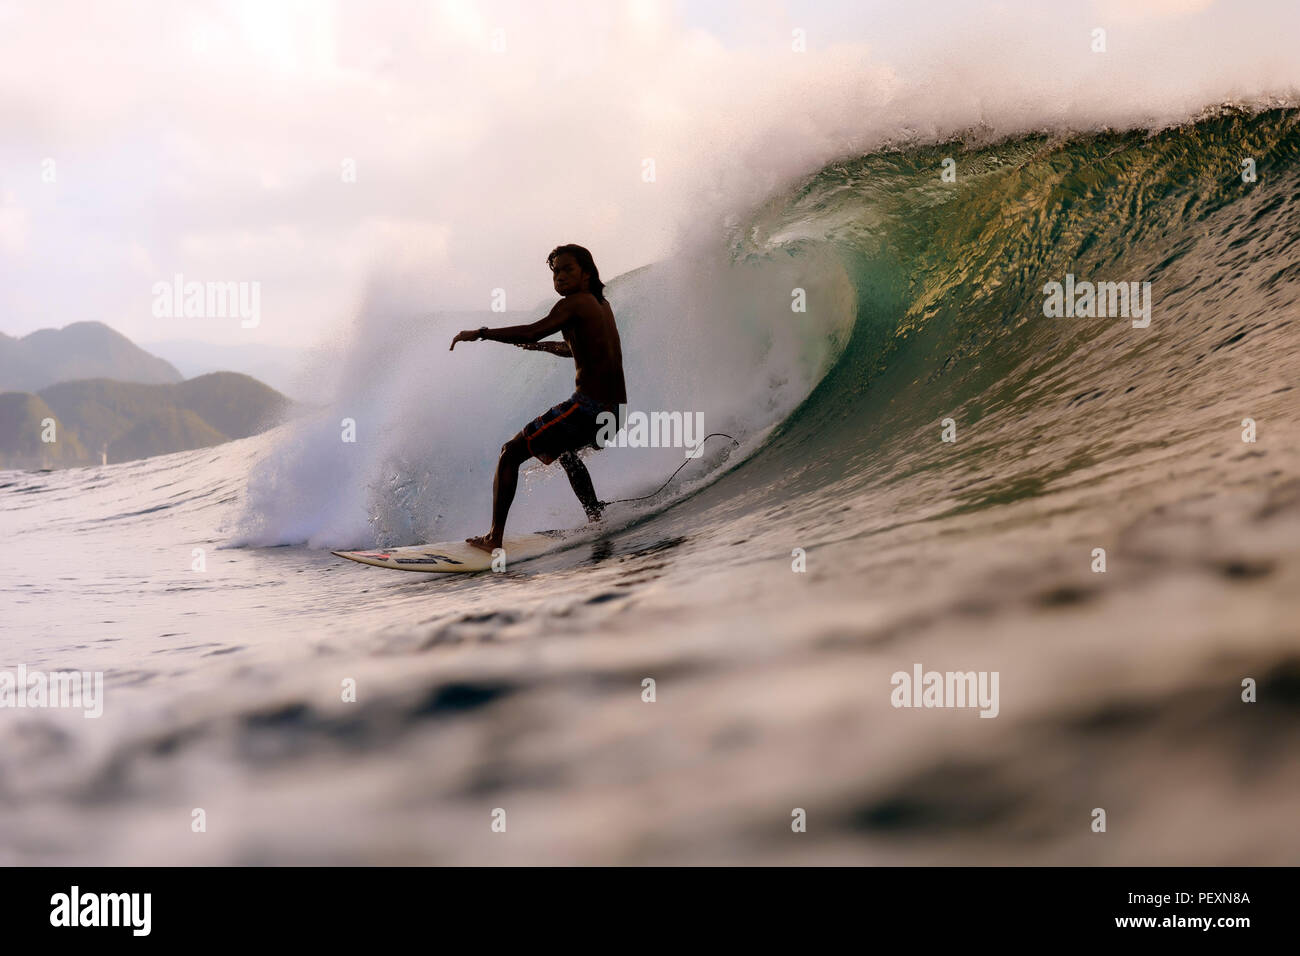 Surfer riding wave in sea Stock Photo